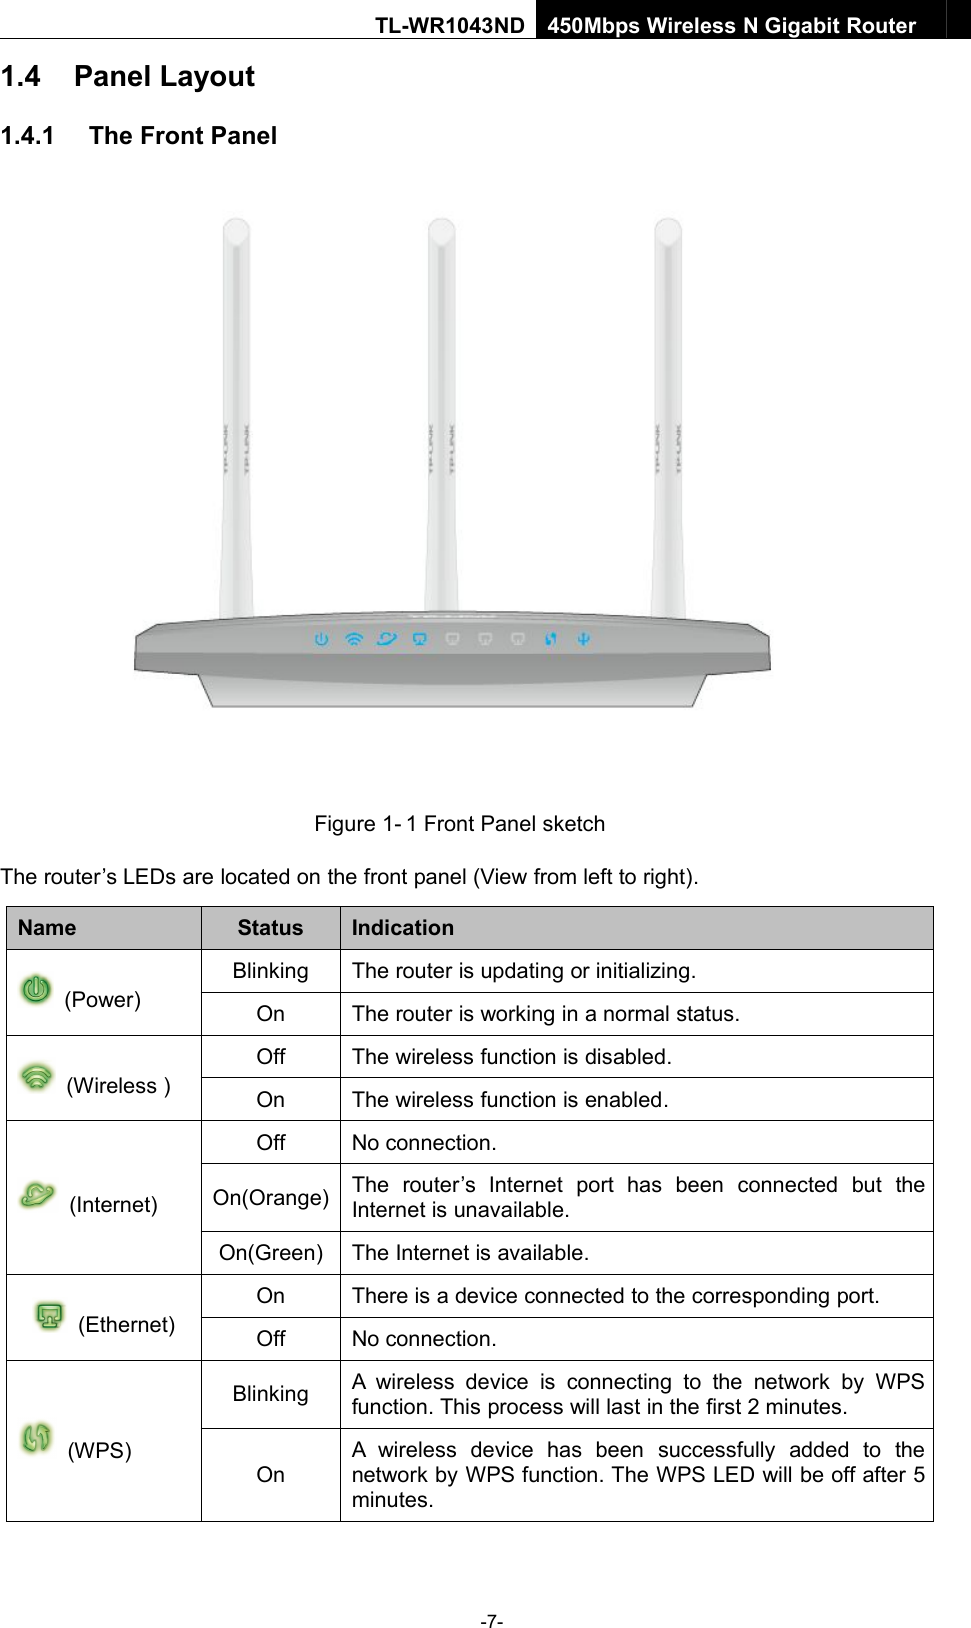 -7-TL-WR1043ND450Mbps Wireless N Gigabit Router1.4 Panel Layout1.4.1 The Front PanelFigure 1- 1 Front Panel sketchThe router’s LEDs are located on the front panel (View from left to right).NameStatusIndication(Power)BlinkingThe router is updating or initializing.OnThe router is working in a normal status.(Wireless )OffThe wireless function is disabled.OnThe wireless function is enabled.(Internet)OffNo connection.On(Orange)The router’s Internet port has been connected but theInternet is unavailable.On(Green)The Internet is available.(Ethernet)OnThere is a device connected to the corresponding port.OffNo connection.(WPS)BlinkingA wireless device is connecting to the network by WPSfunction. This process will last in the first 2 minutes.OnA wireless device has been successfully added to thenetwork by WPS function. The WPS LED will be off after 5minutes.